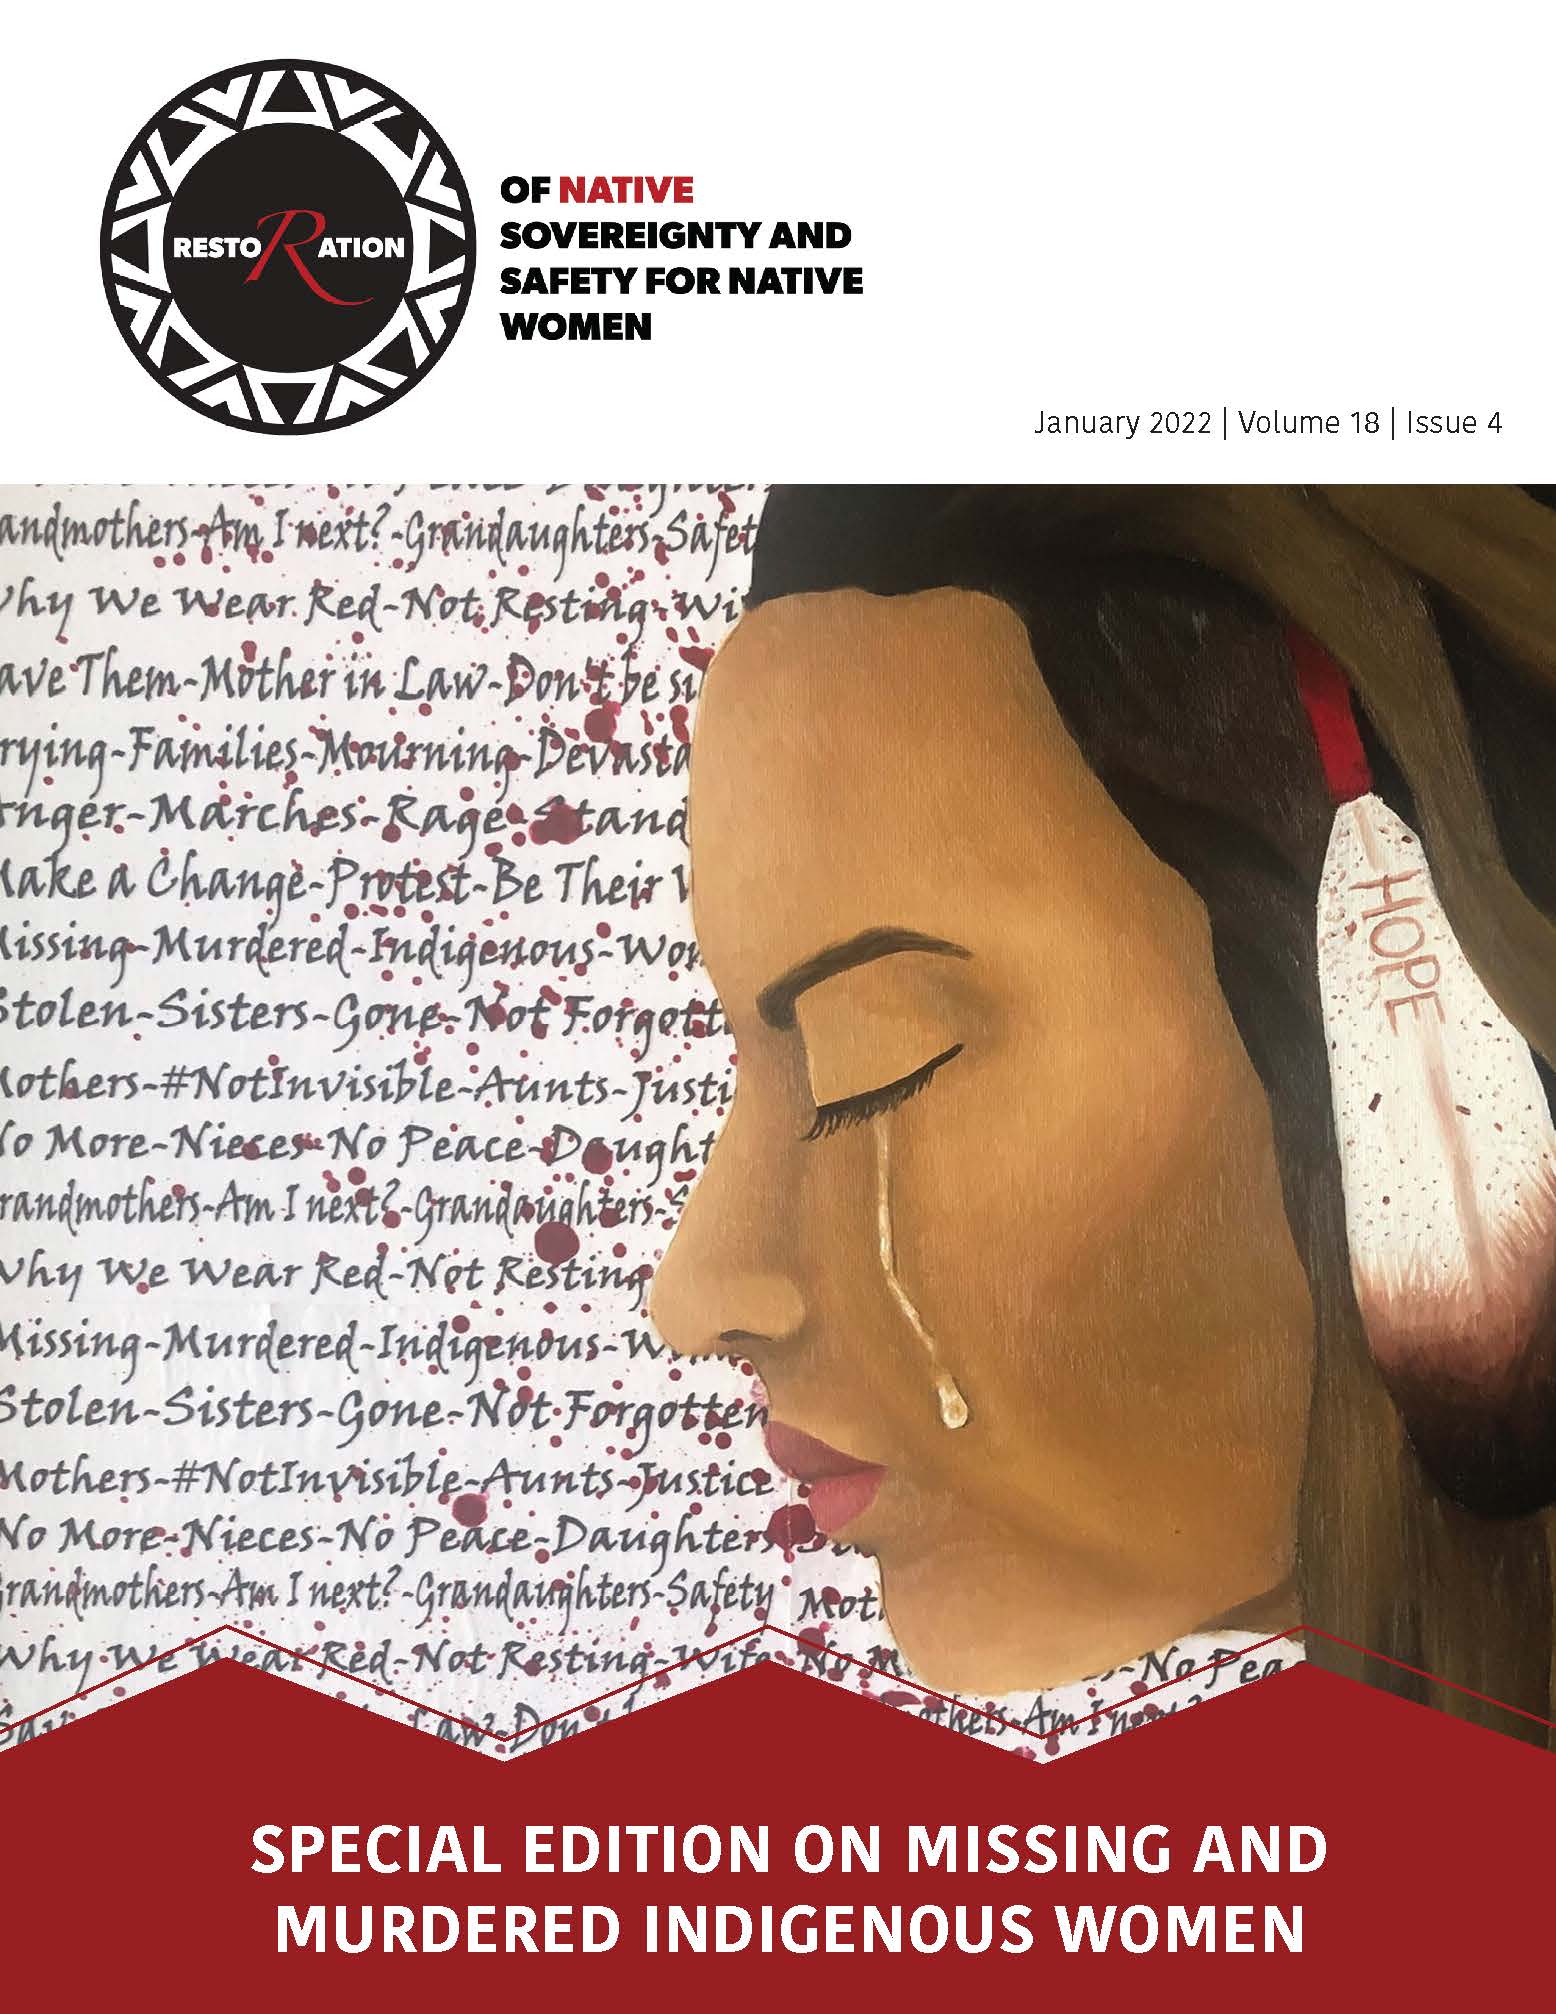 Cover of Restoration 18.4. Title in white: "Special Edition on Missing and Murdered Indigenous Women" over graphic of Native woman. Logo of Restoration. January 2022, Volume 18, Issue 4 in black text at top.